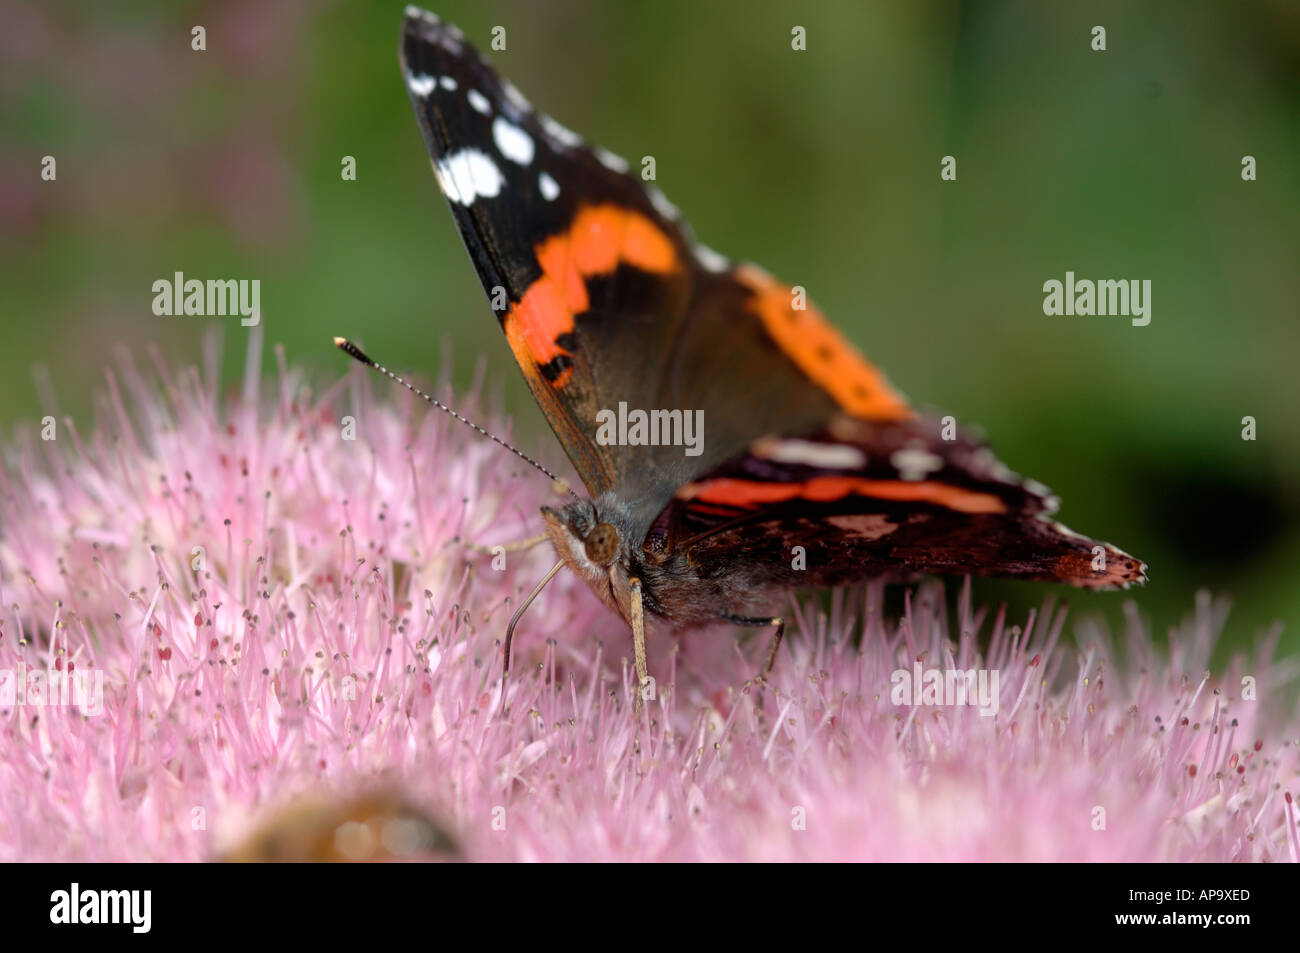 Ice plant (Hylotelephium spectabile) flowerhead close up with red admiral butterfly feeding Stock Photo